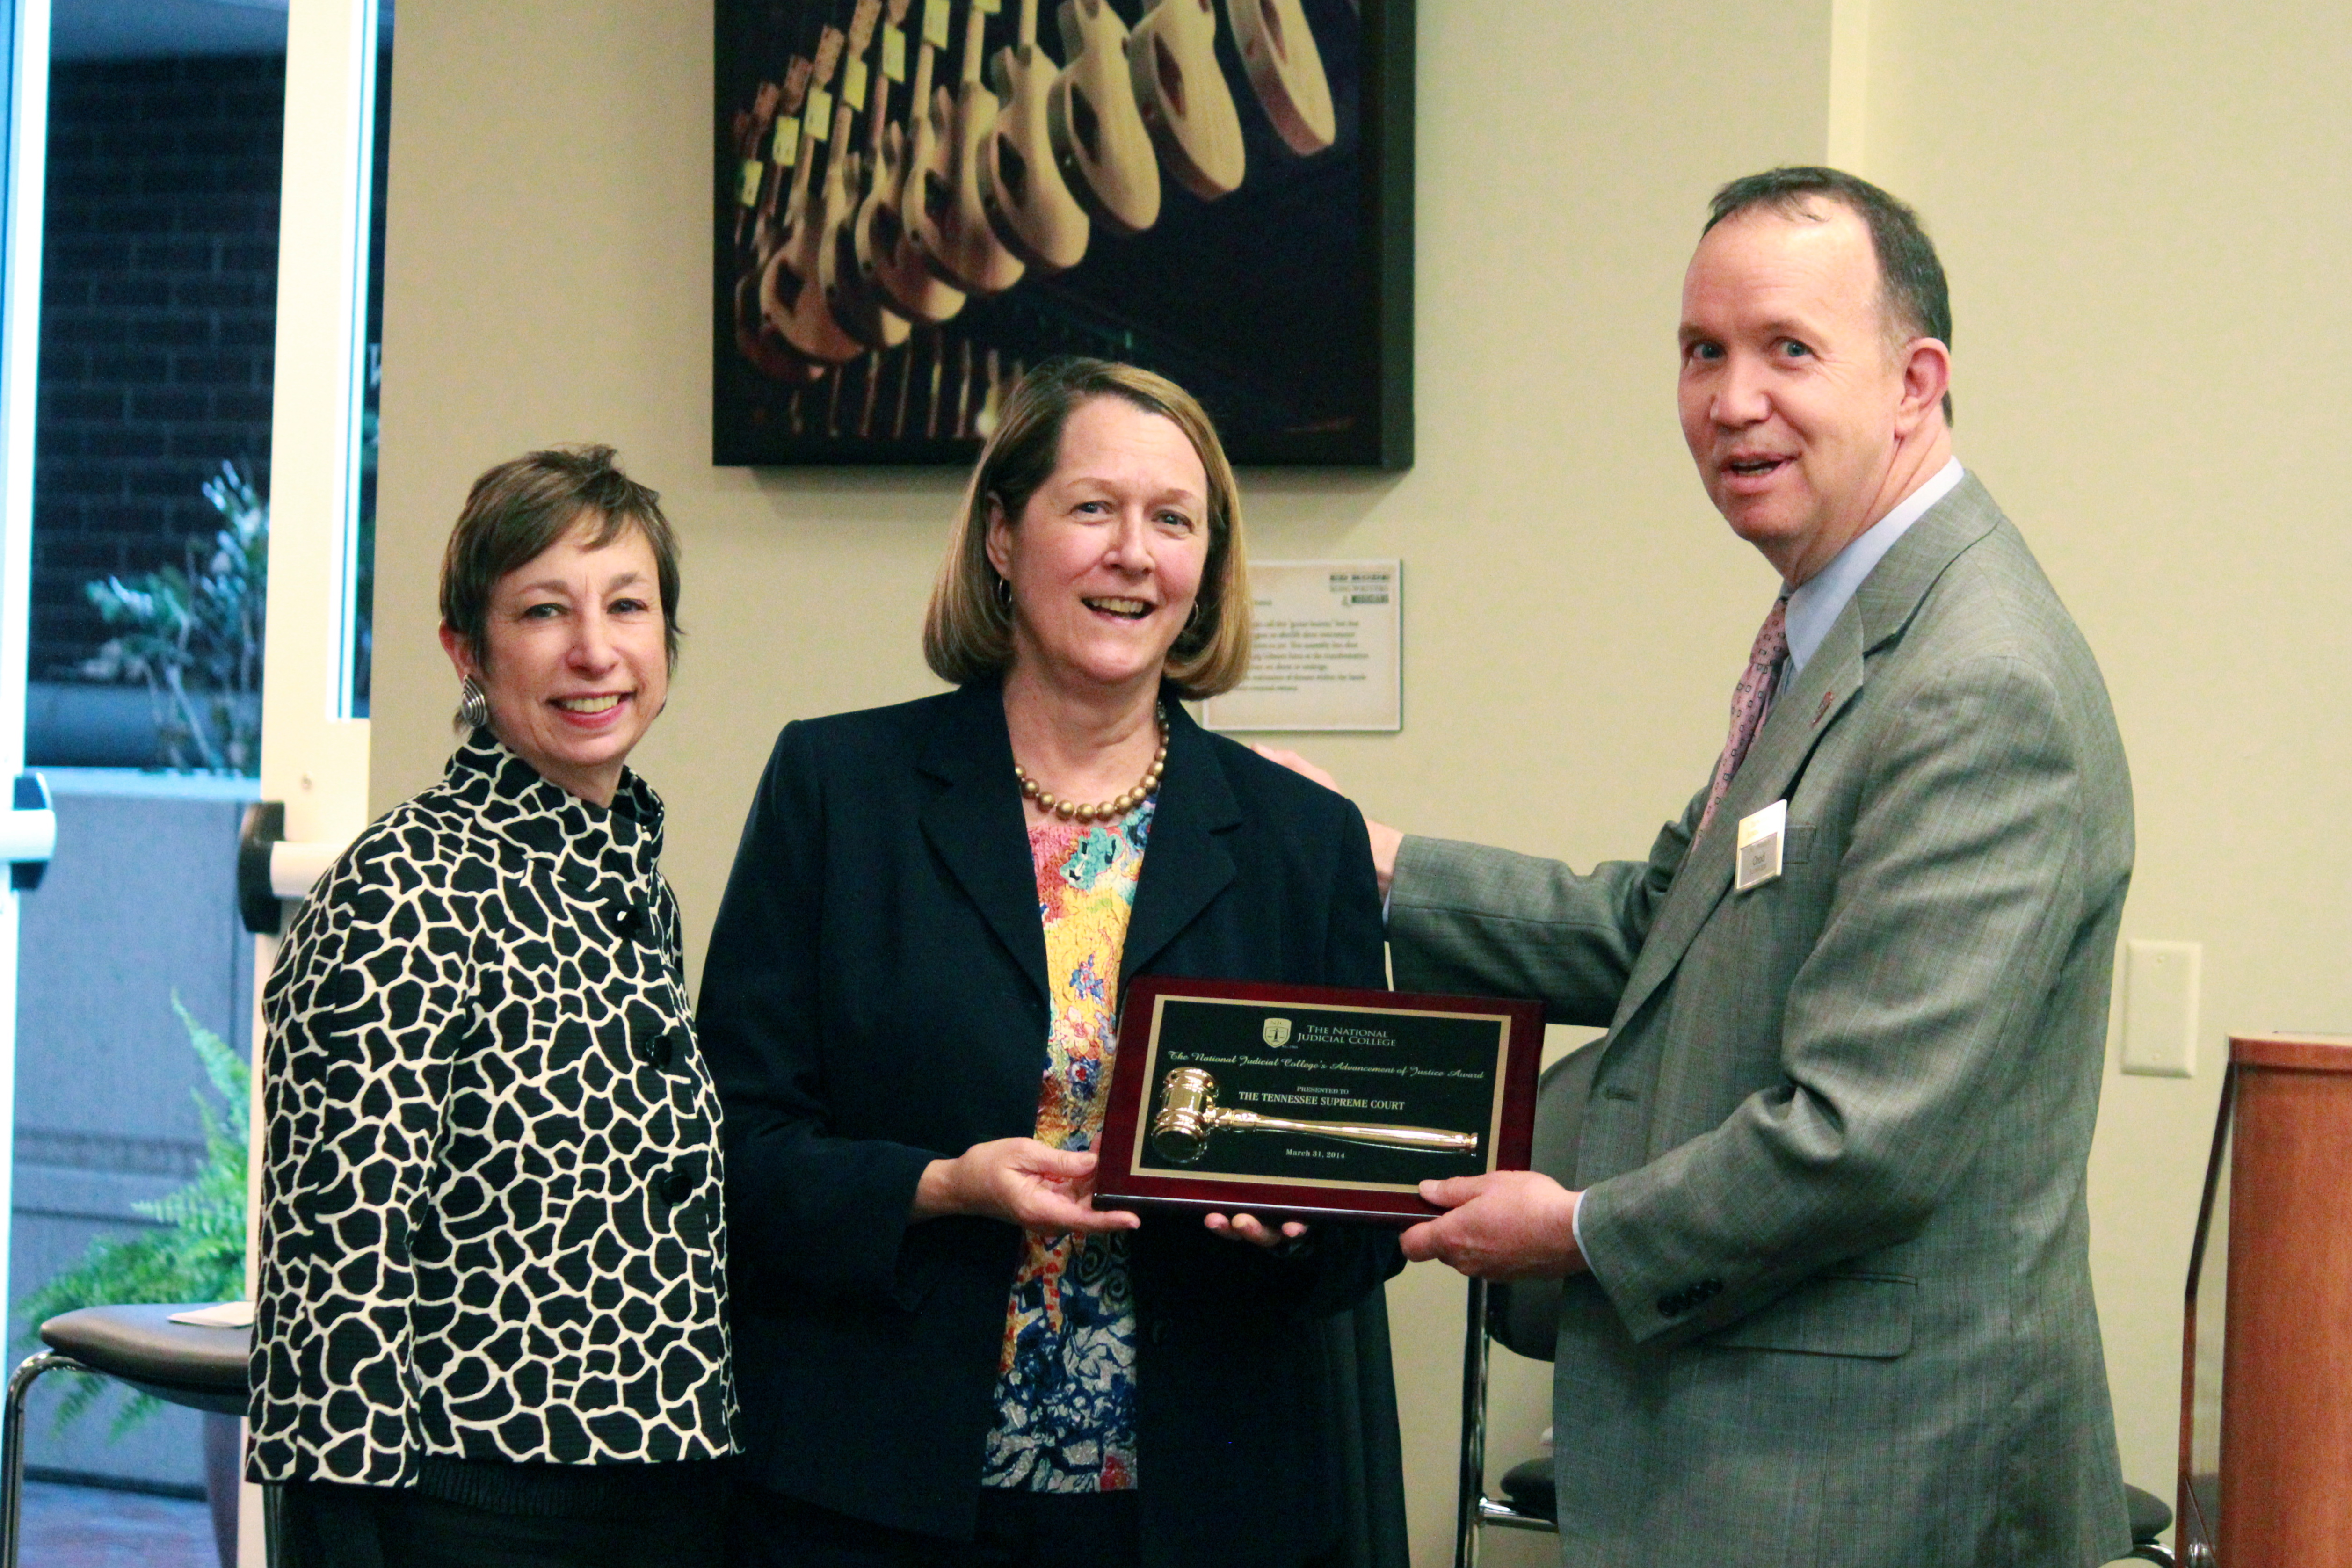 Supreme Court Justice Janice M. Holder and Justice Cornelia A. Clark receive the Advancement of Justice Award from the National Judicial College's Chad Schmucker.